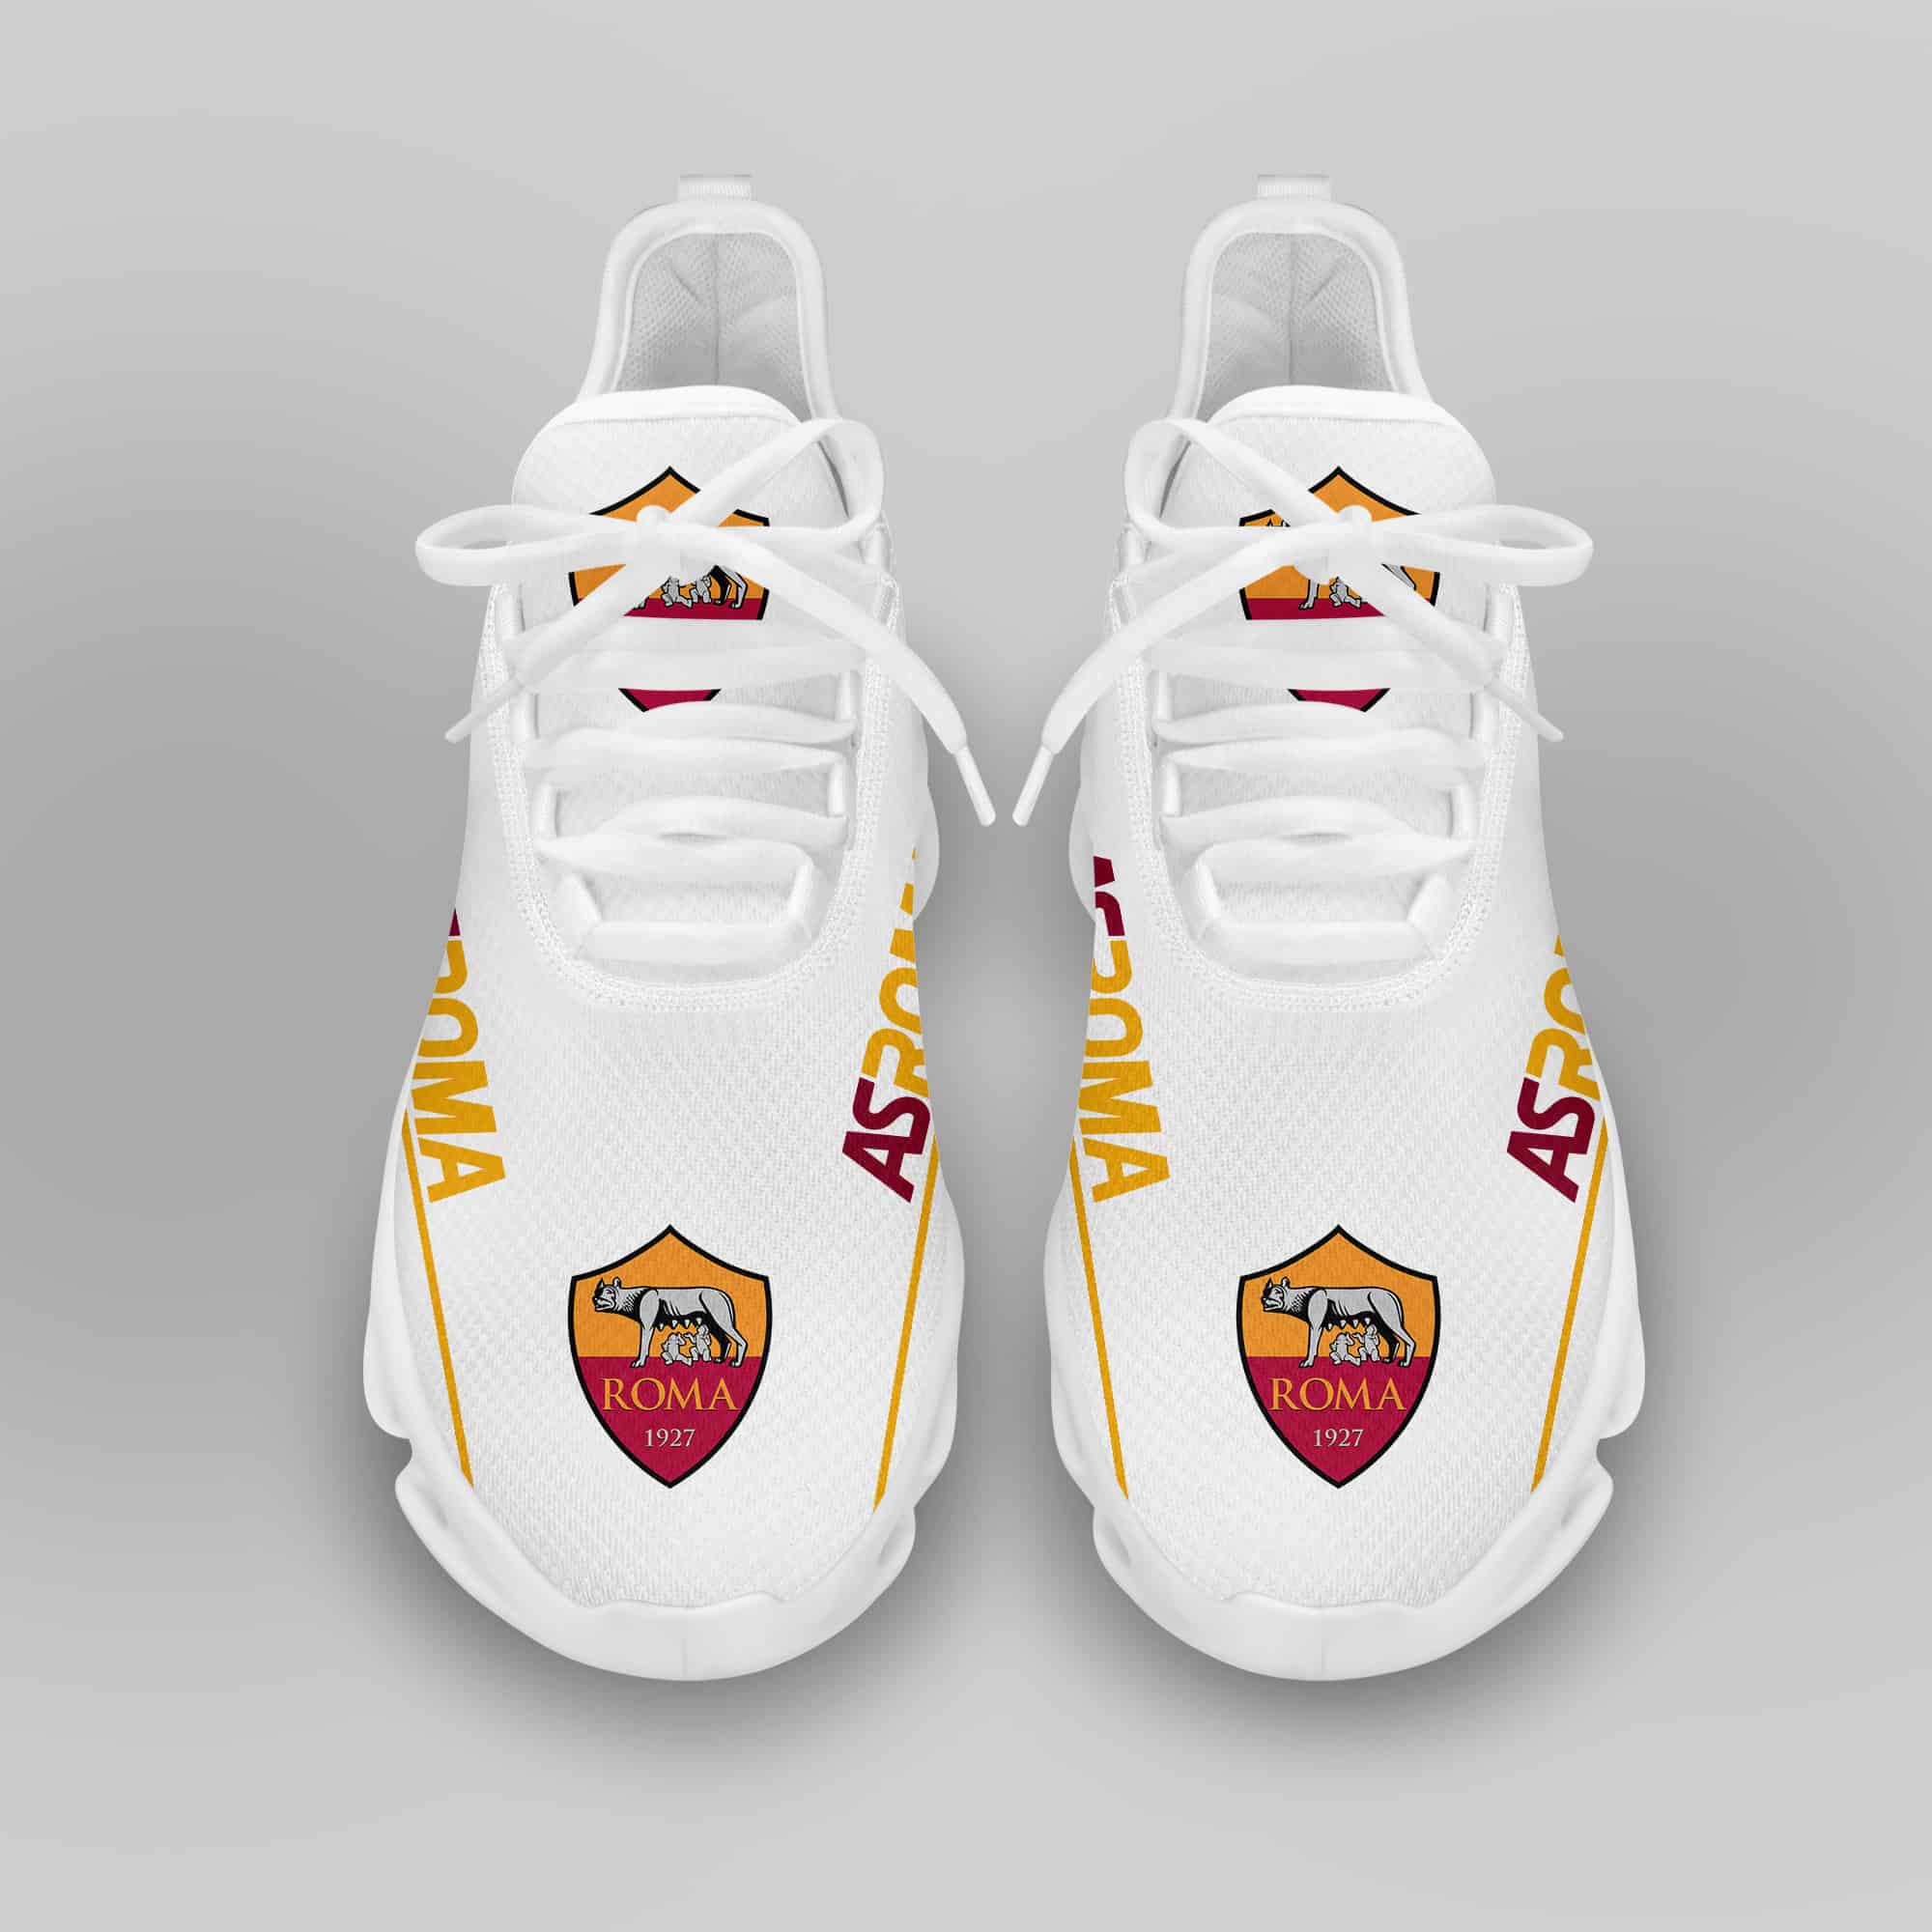 As Roma Running Shoes Max Soul Shoes Sneakers Ver 21 3